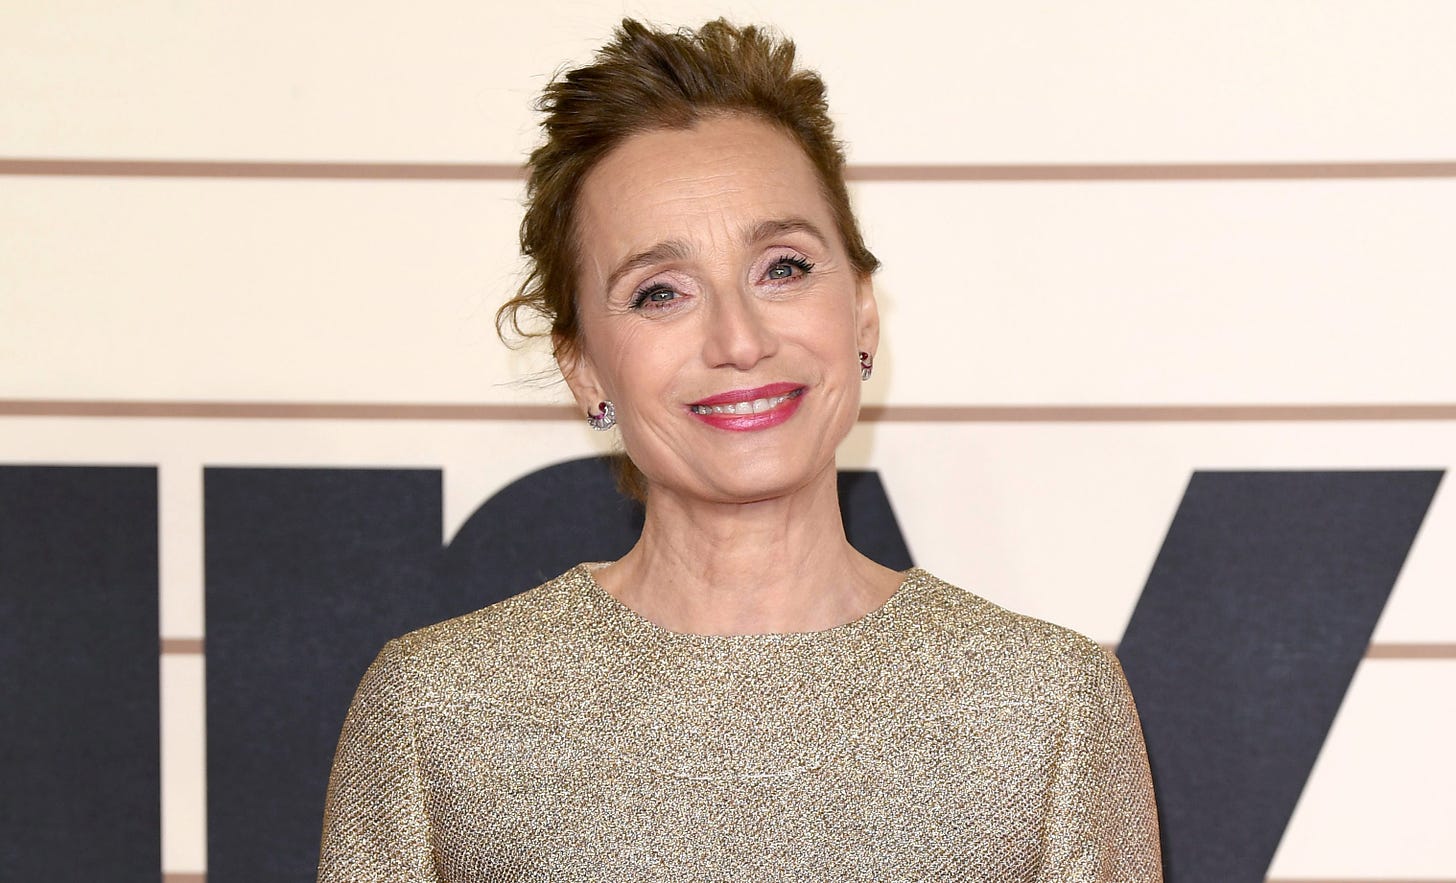 Who is Kristin Scott Thomas and who is she dating? – The Sun | The Sun